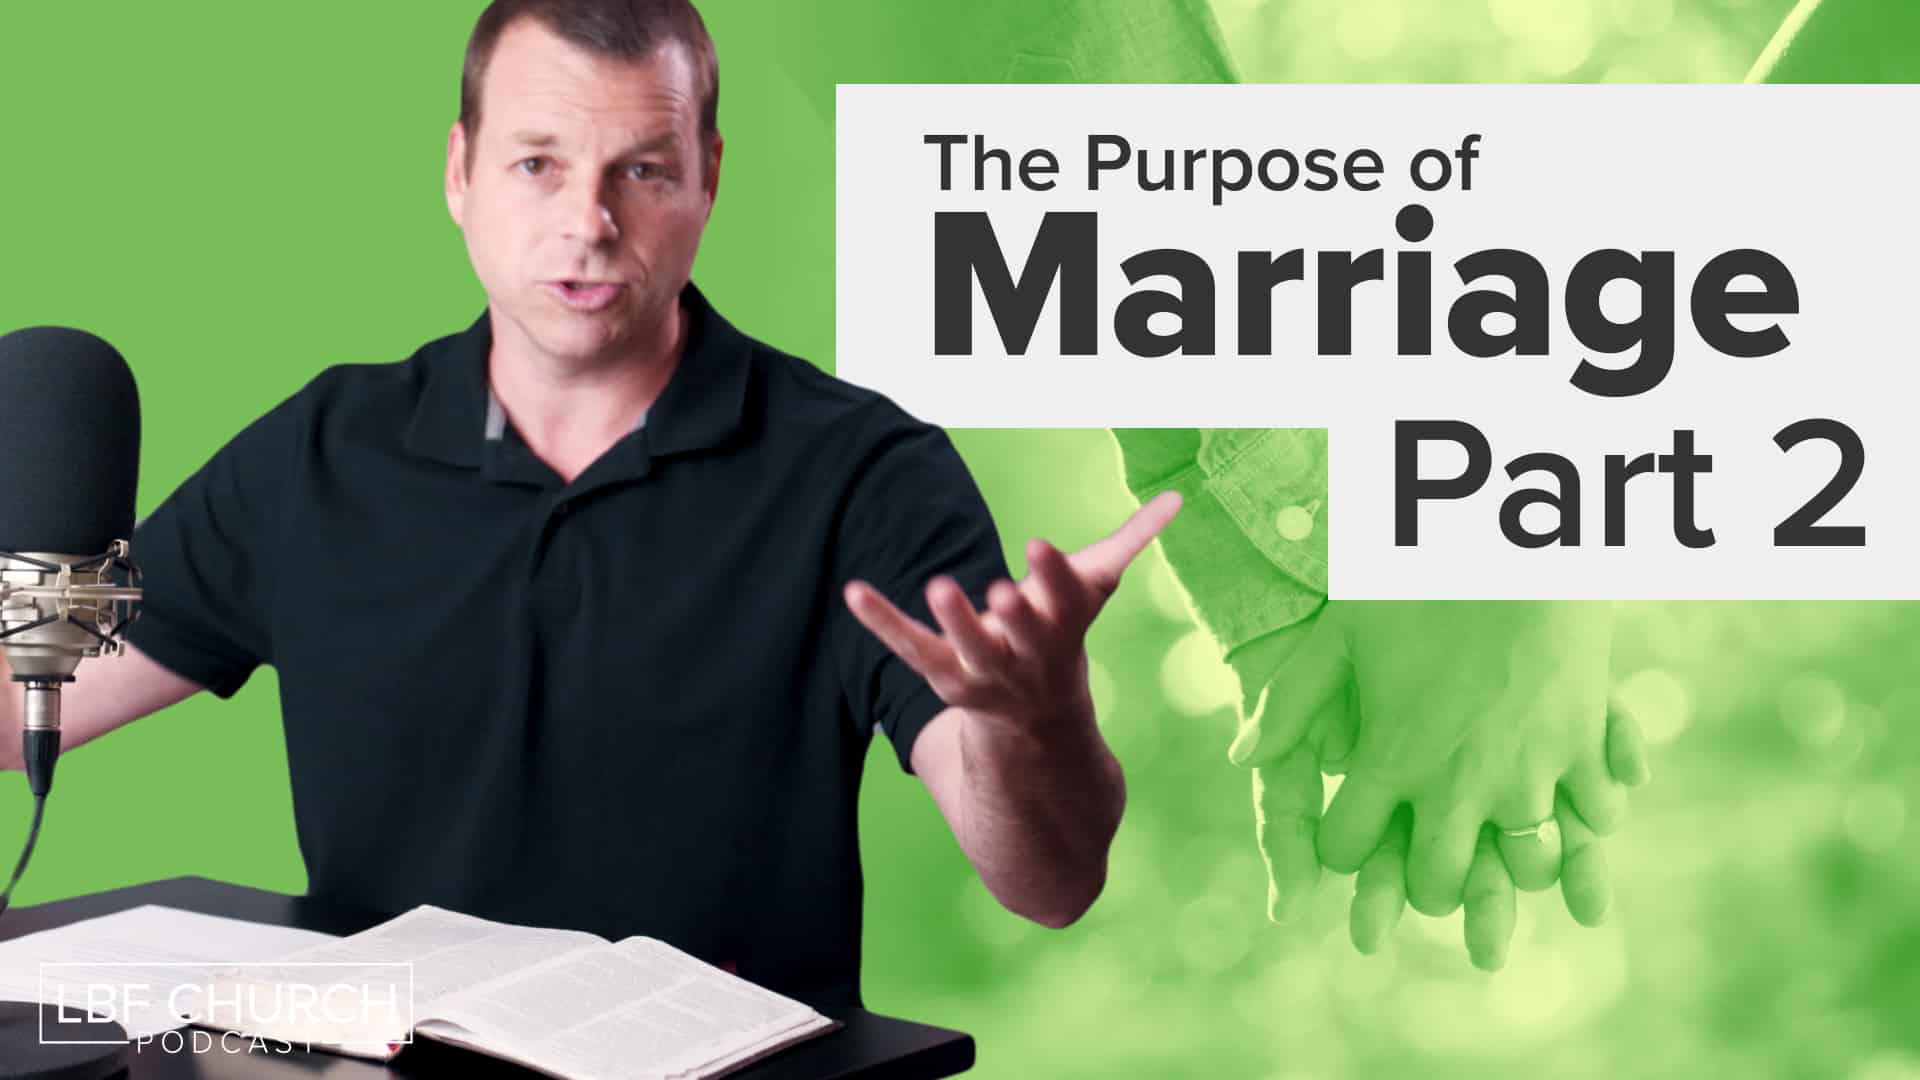 The Purpose of Marriage